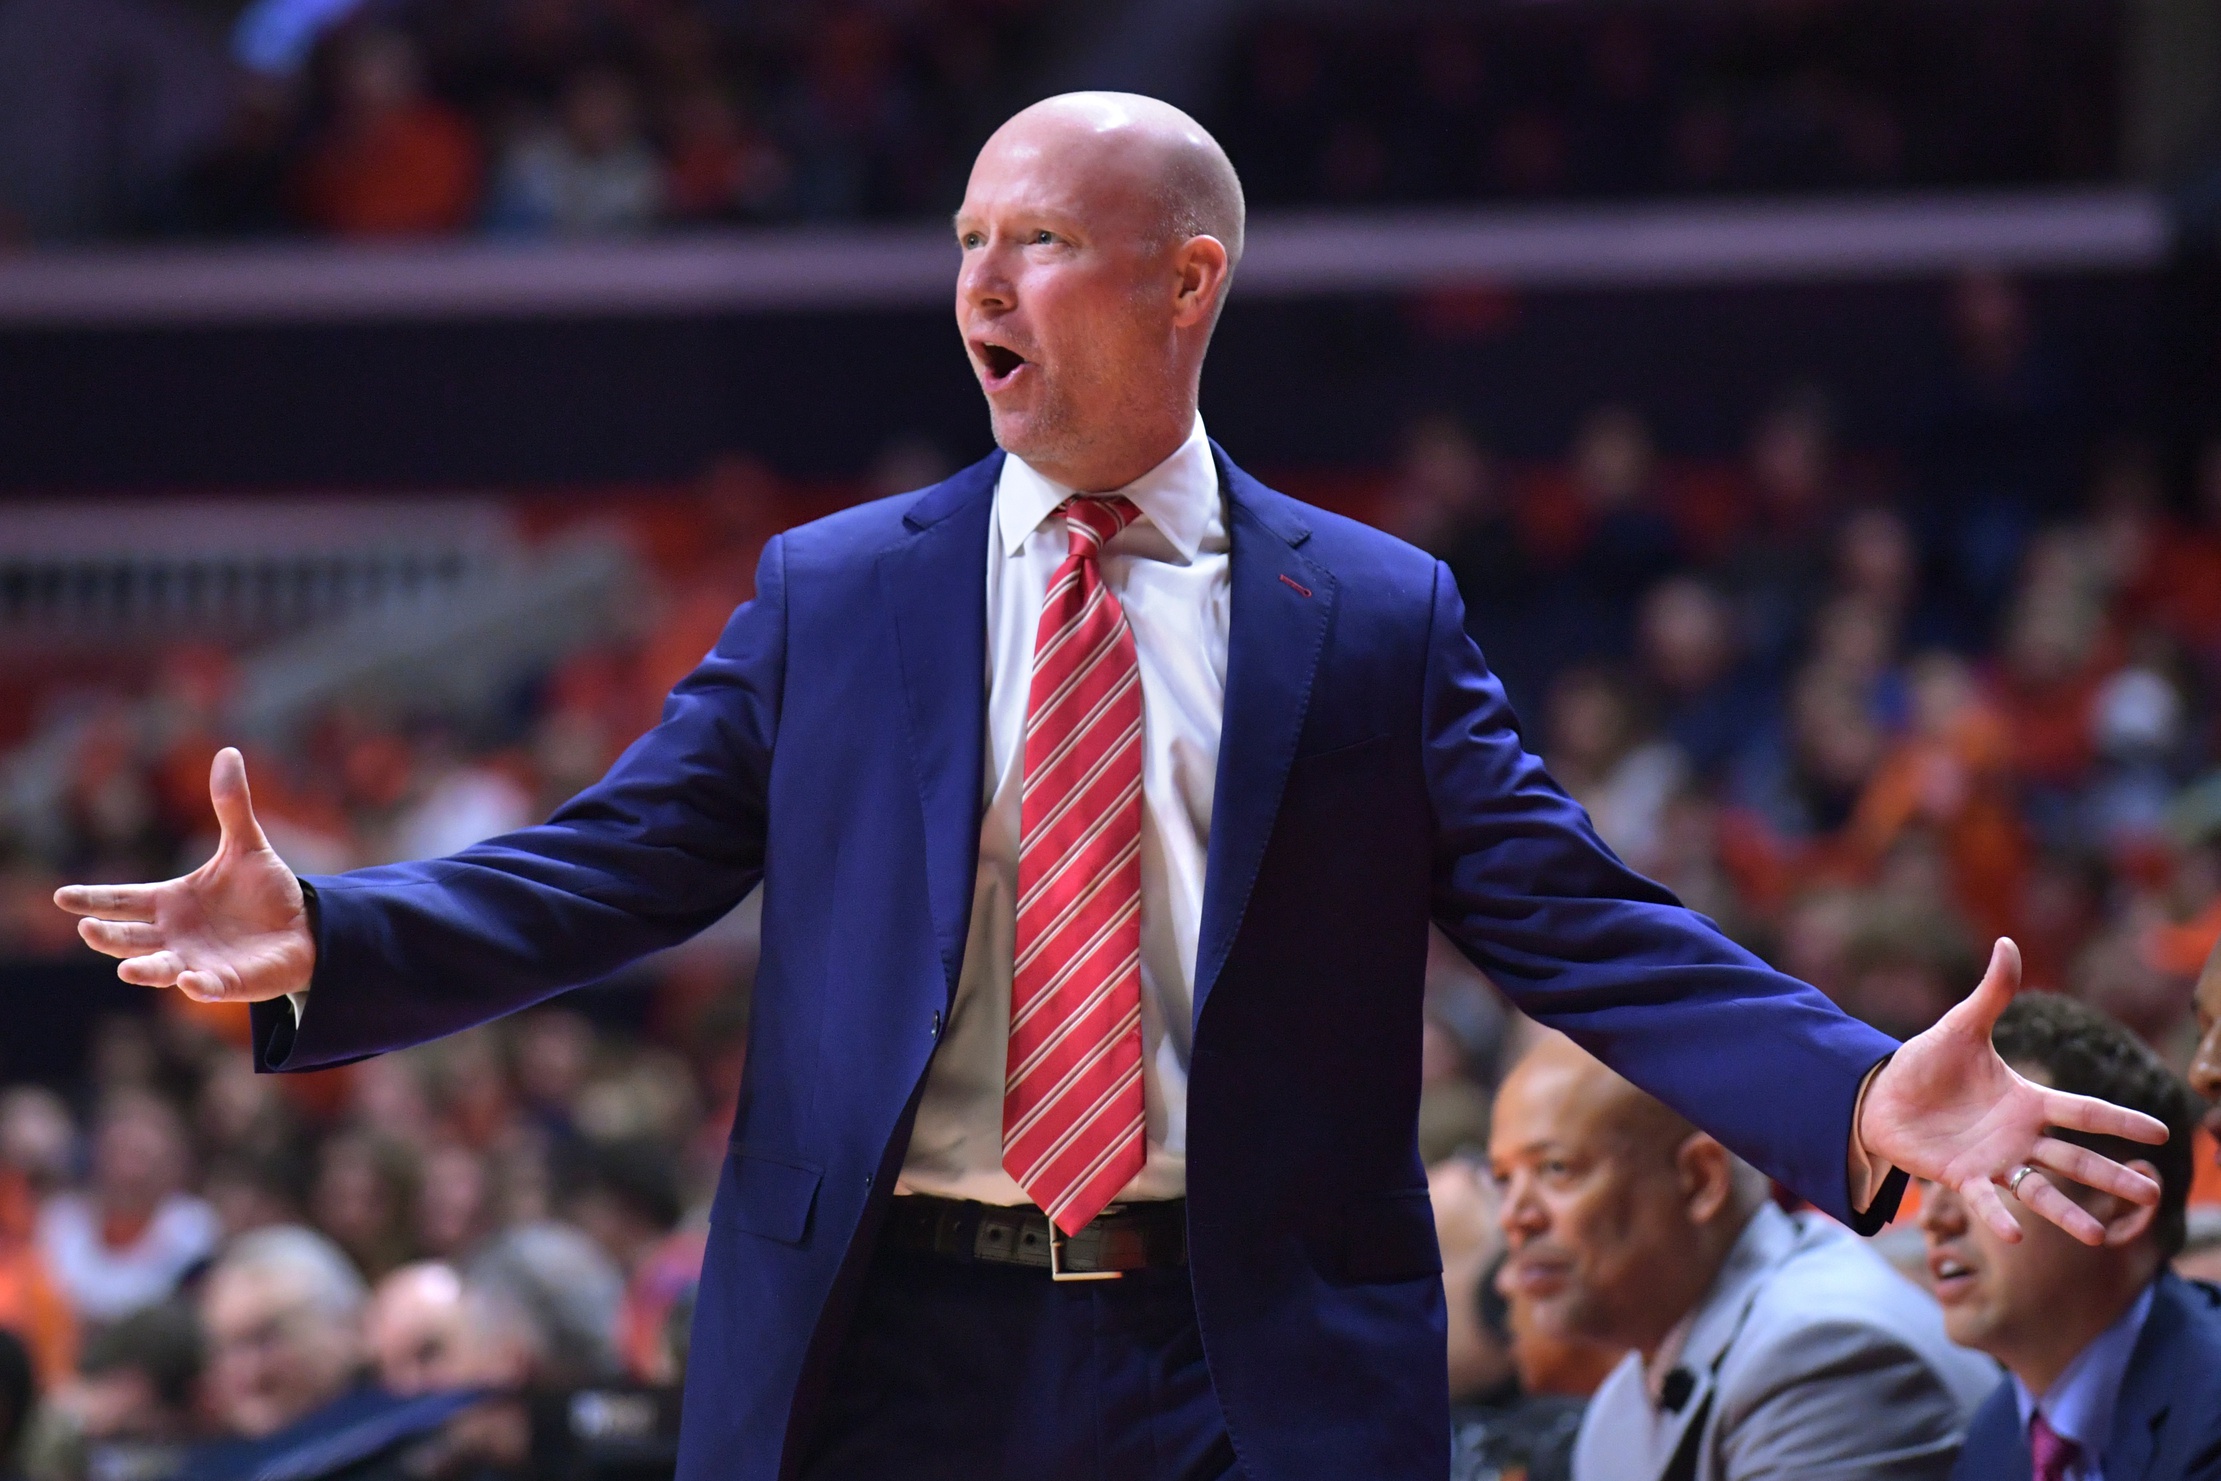 Kevin Willard hopes to propel Maryland to March Madness.